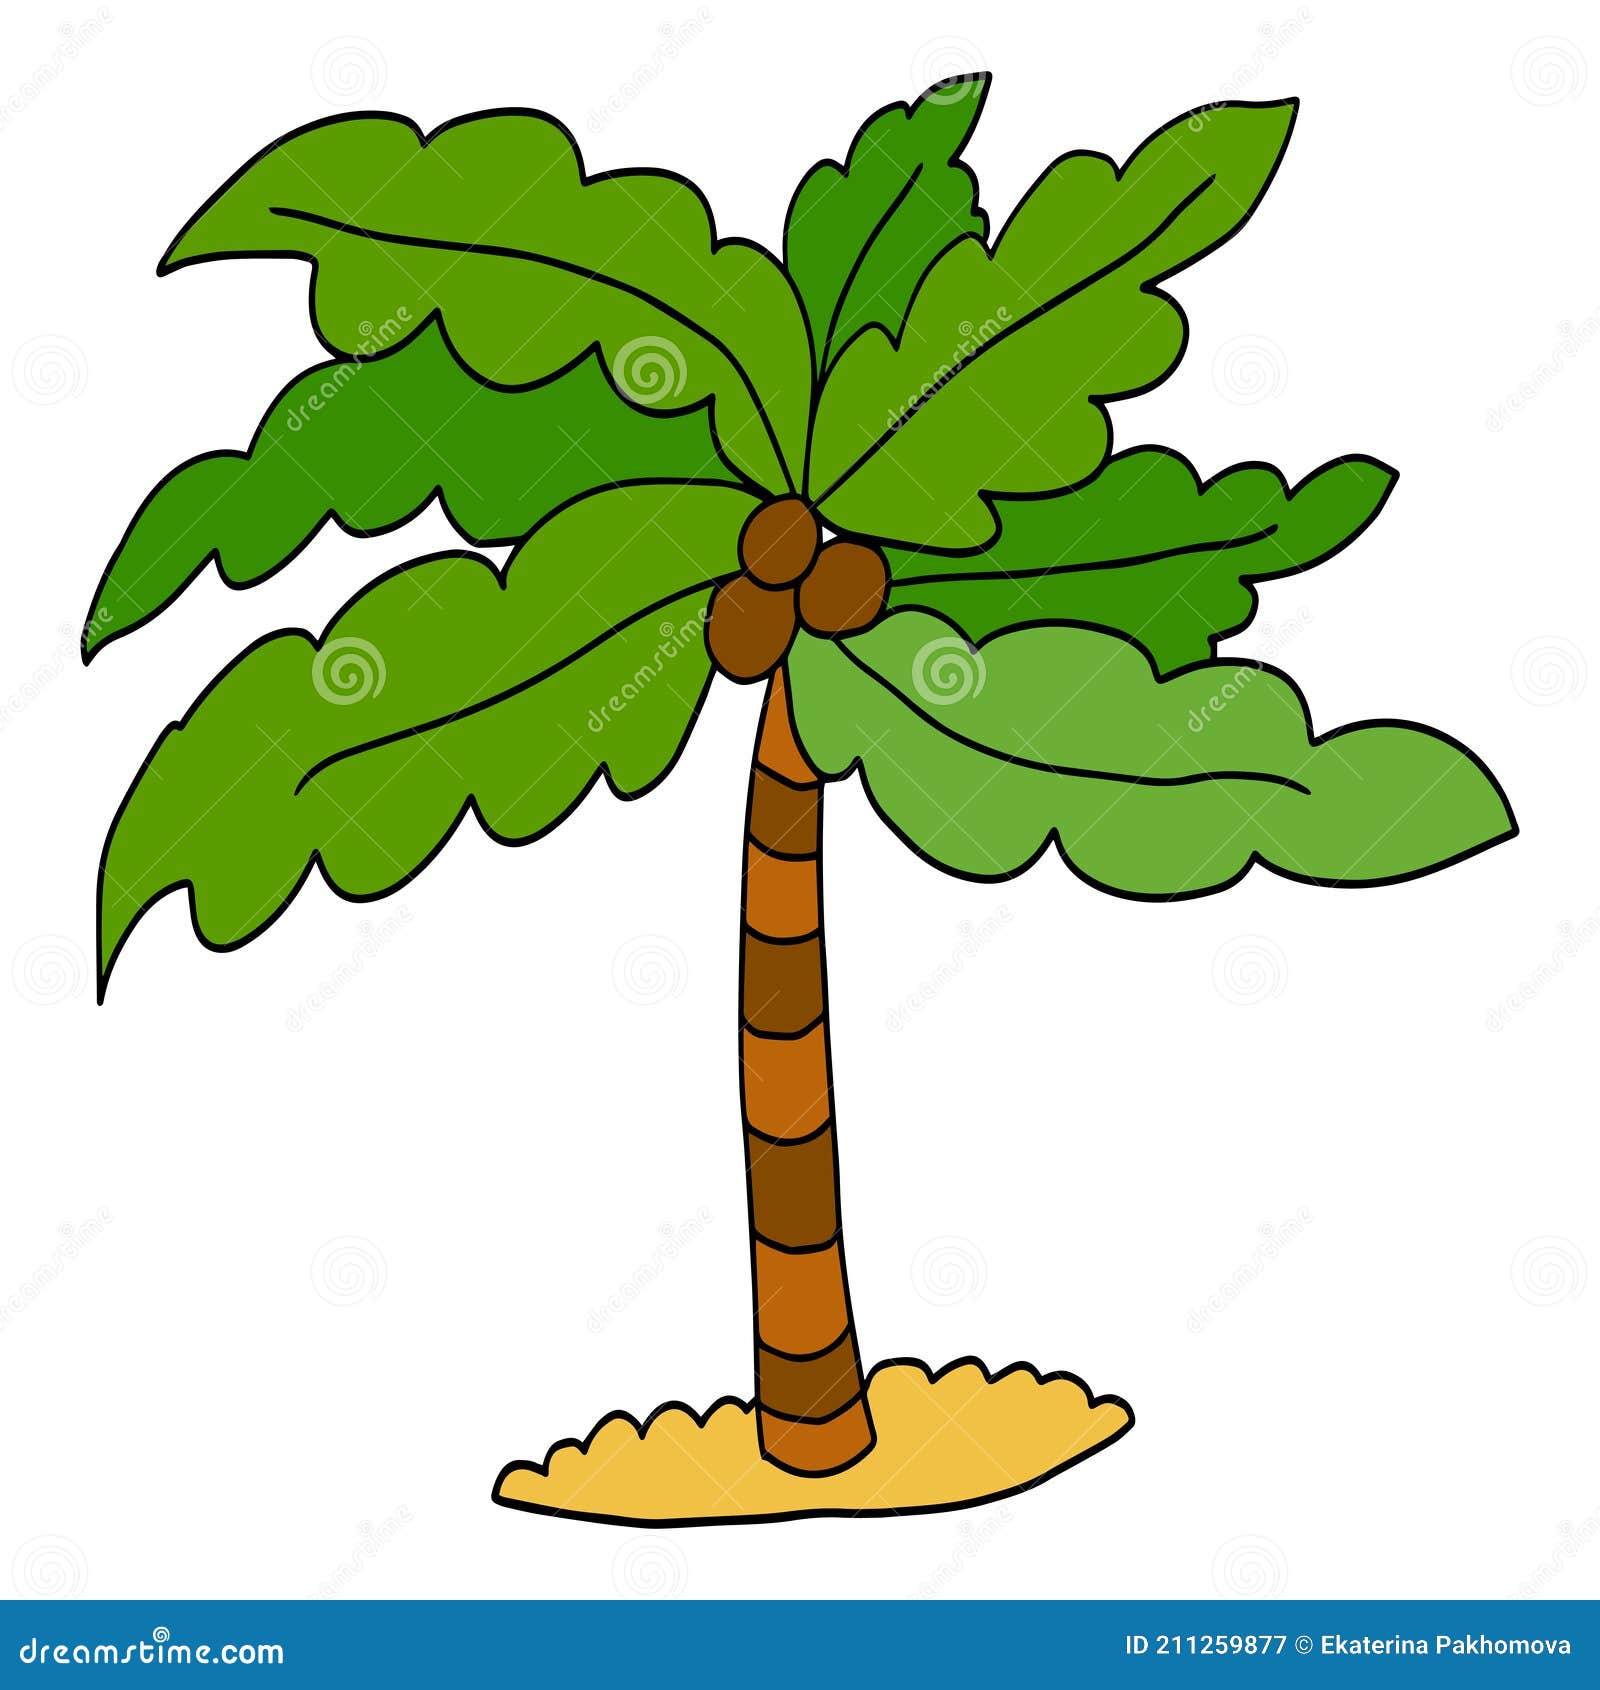 Cute Cartoon Doodle Linear Palm Isolated on White Background Stock ...